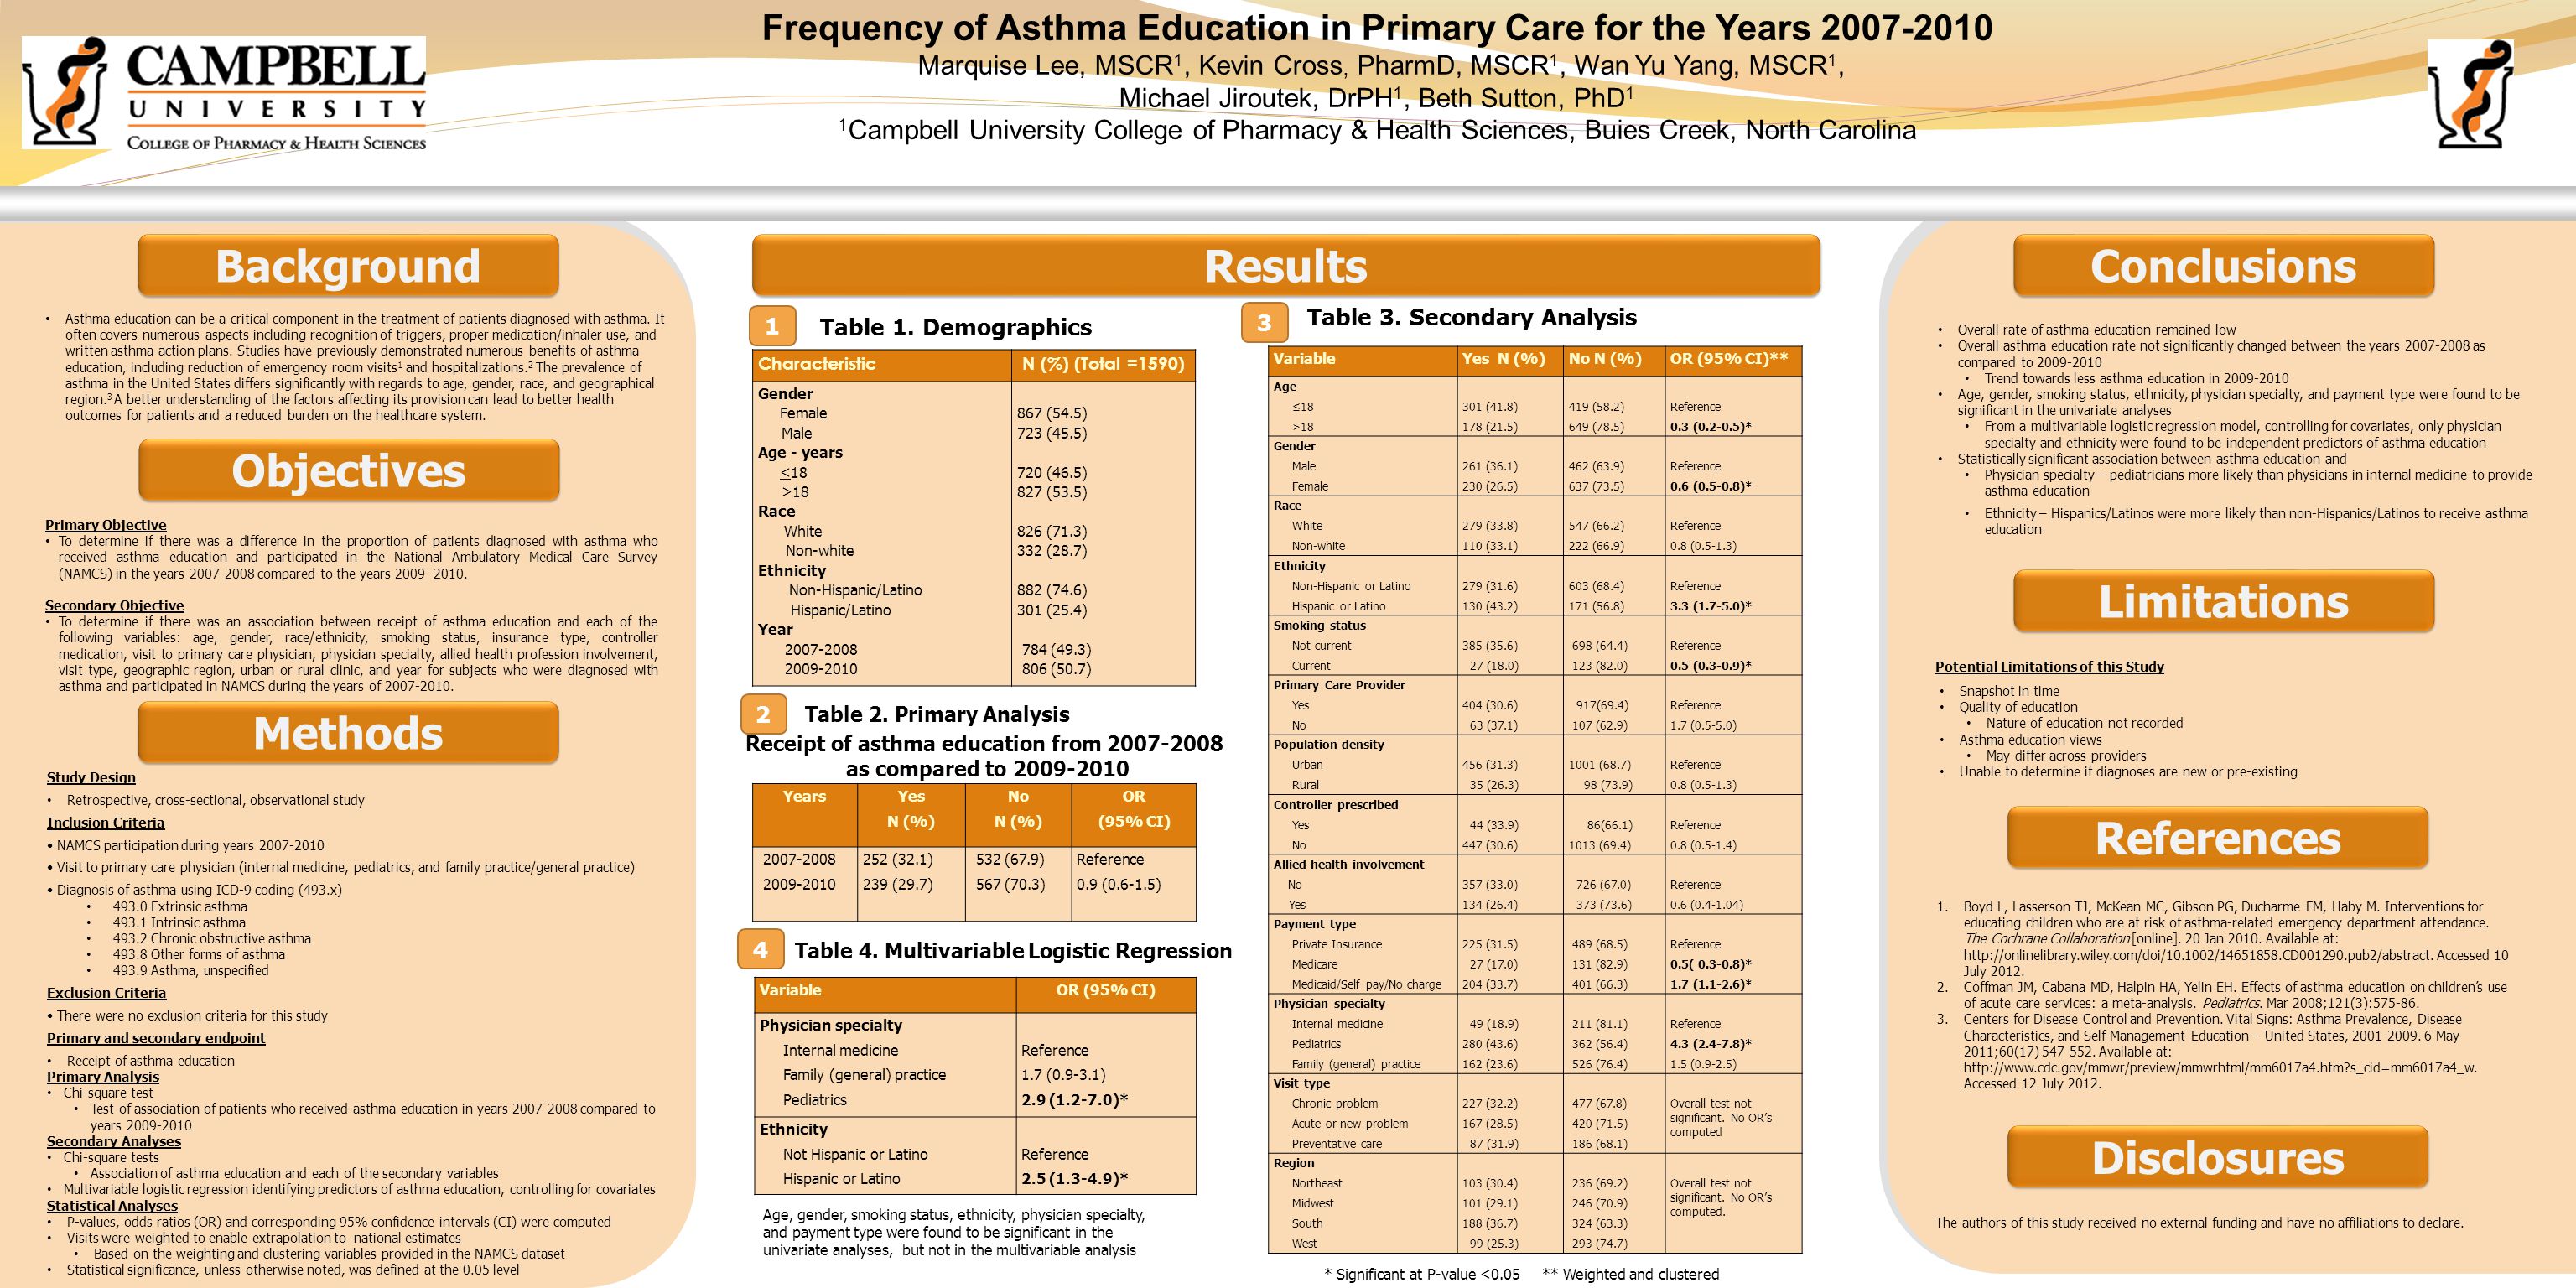 Frequency of Asthma Education in Primary Care for the Years Marquise Lee, MSCR 1, Kevin Cross, PharmD, MSCR 1, Wan Yu Yang, MSCR 1, Michael Jiroutek, DrPH 1, Beth Sutton, PhD 1 1 Campbell University College of Pharmacy & Health Sciences, Buies Creek, North Carolina Overall rate of asthma education remained low Overall asthma education rate not significantly changed between the years as compared to Trend towards less asthma education in Age, gender, smoking status, ethnicity, physician specialty, and payment type were found to be significant in the univariate analyses From a multivariable logistic regression model, controlling for covariates, only physician specialty and ethnicity were found to be independent predictors of asthma education Statistically significant association between asthma education and Physician specialty – pediatricians more likely than physicians in internal medicine to provide asthma education Ethnicity – Hispanics/Latinos were more likely than non-Hispanics/Latinos to receive asthma education Potential Limitations of this Study Table 2.